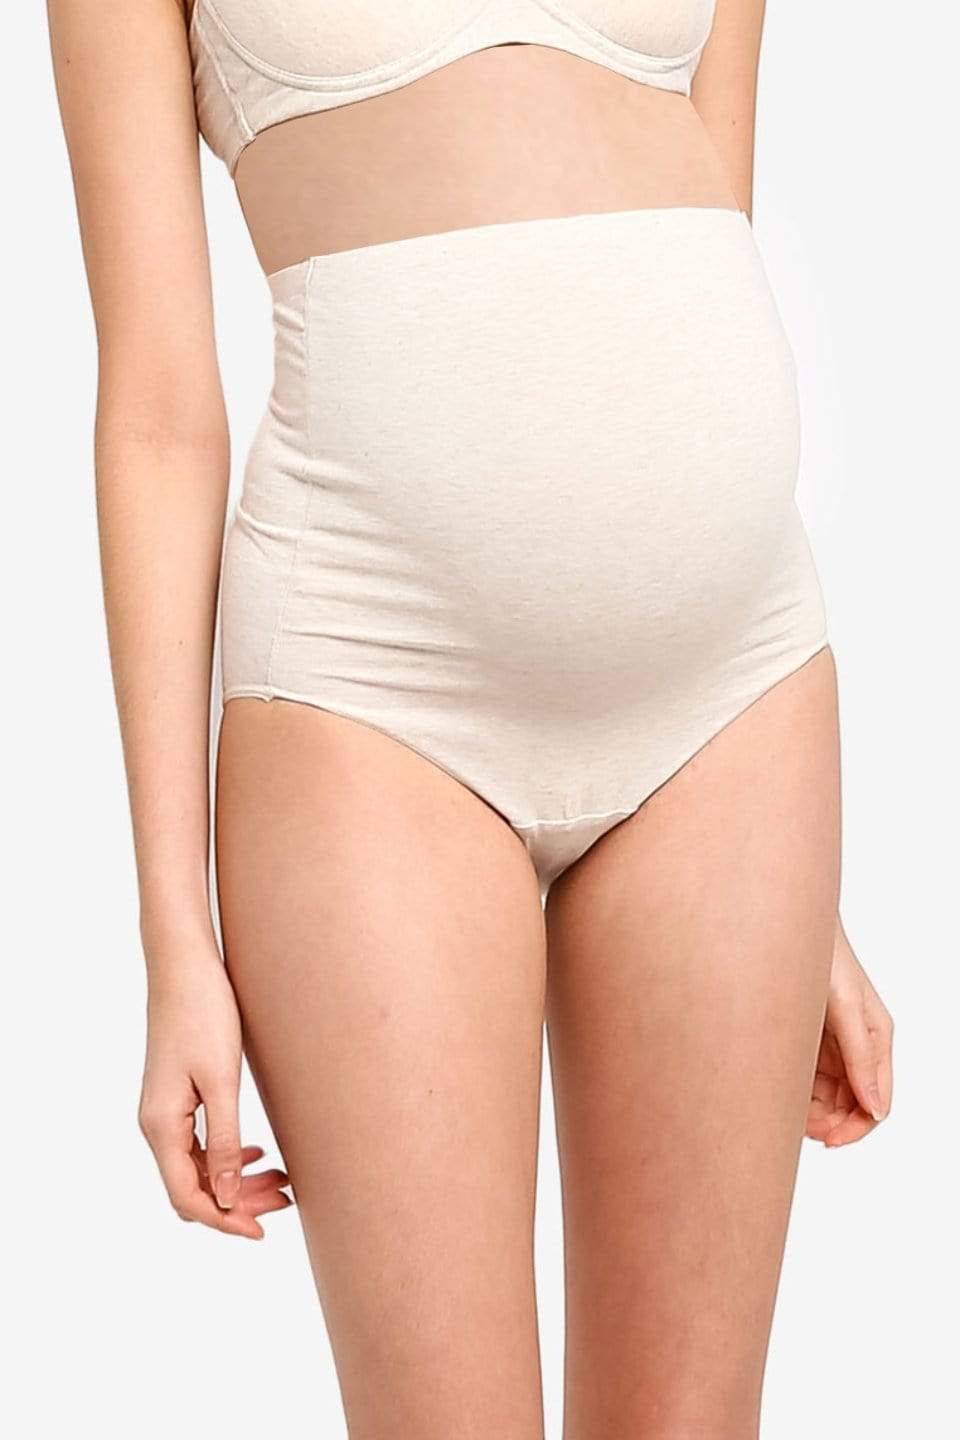 MARIA 45-100kg High Waist Disposable Underwear Women Pure Cotton Travel  Business Trip Pregnant Maternity Planing Belly Confinement Shorts Large  Size Menstrual